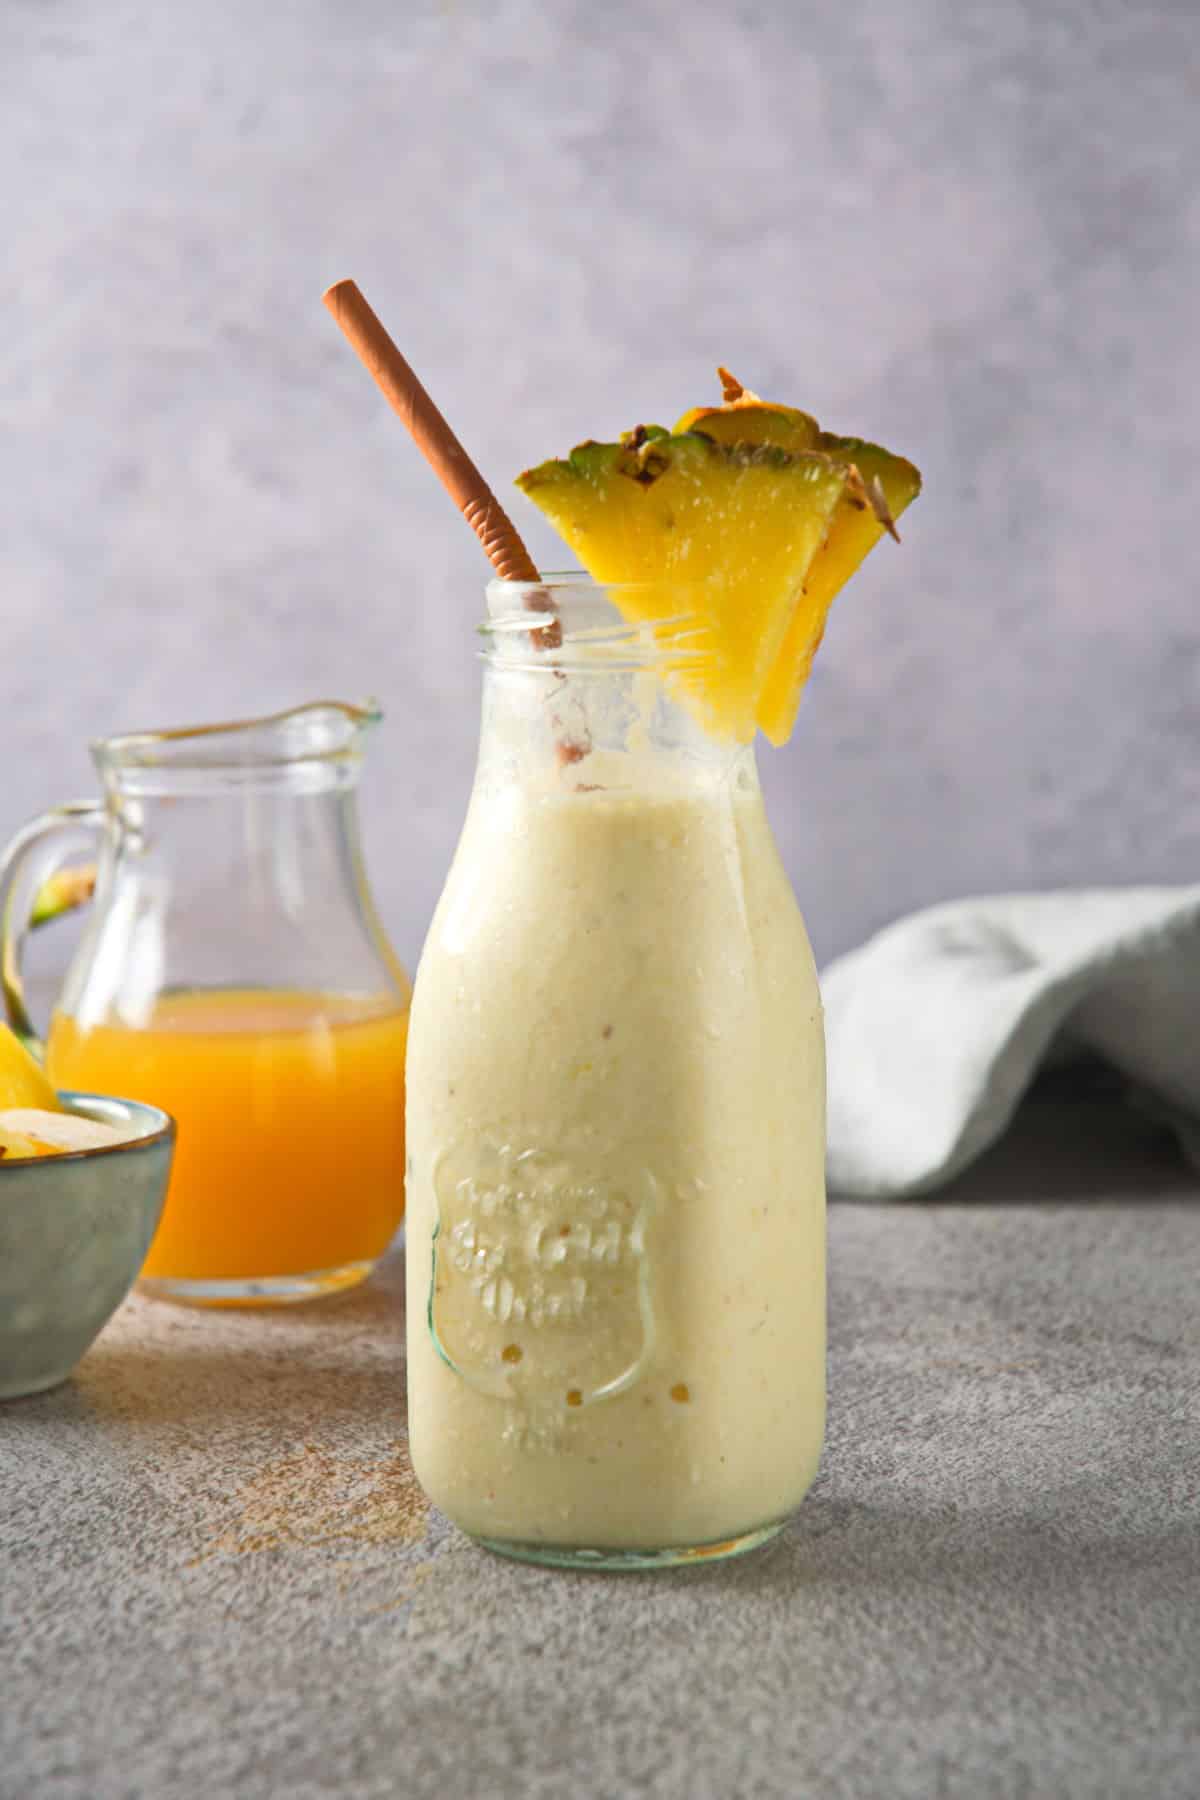 Pineapple smoothie in a jar with pineapple wedge and straw.